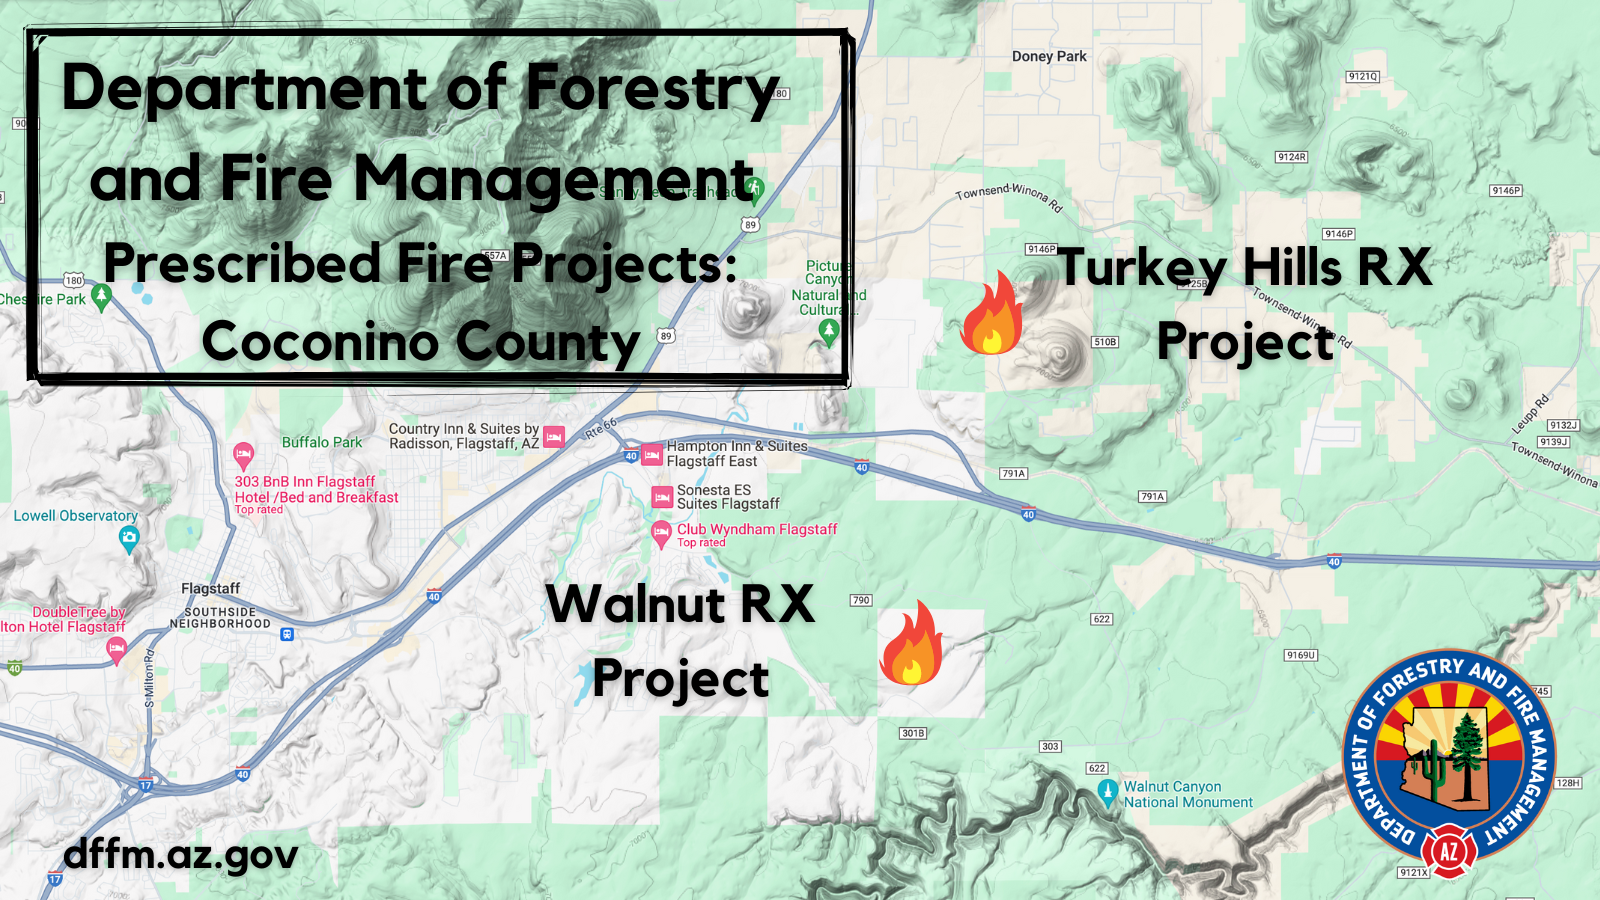 Map showing location of prescribed fire projects